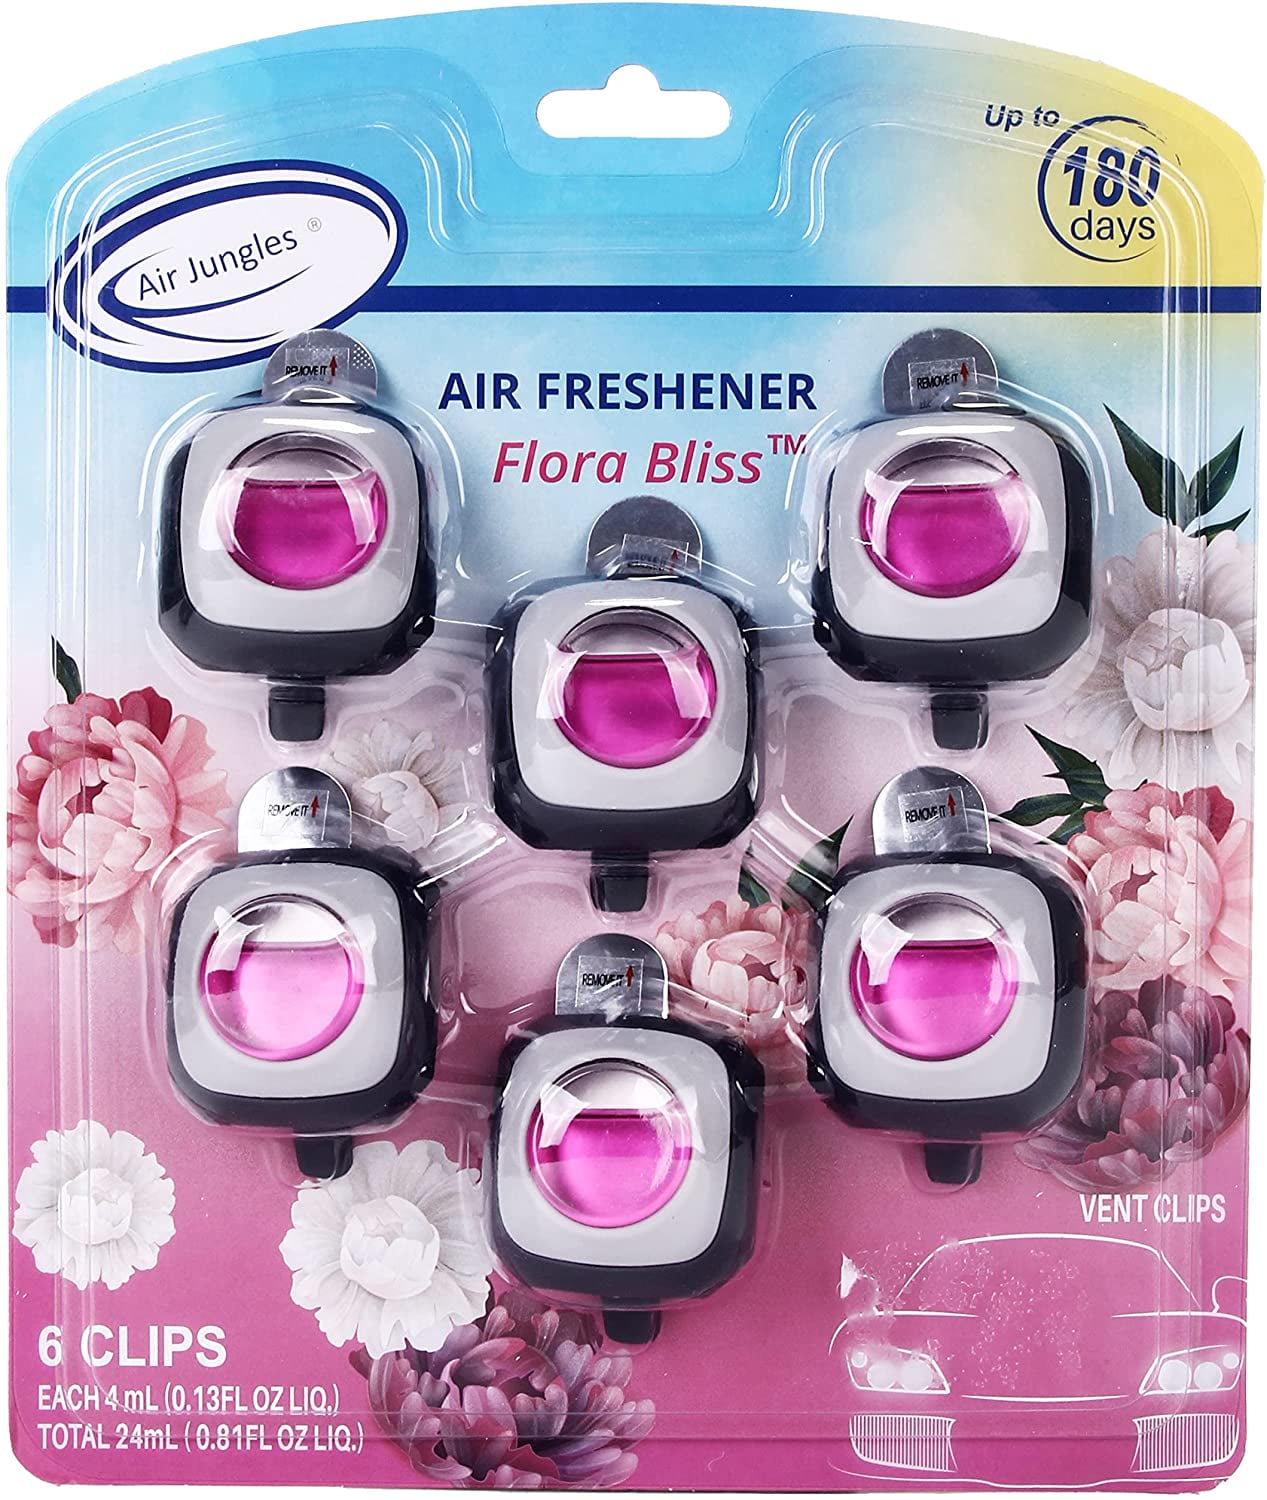 Scents Car Vent Clips Air Freshener, Automotive Air Freshener and Odor  Eliminator, Long-lasting Fragrance Up to 180 Days, Vanilla, 3 ml, 4 Pack 